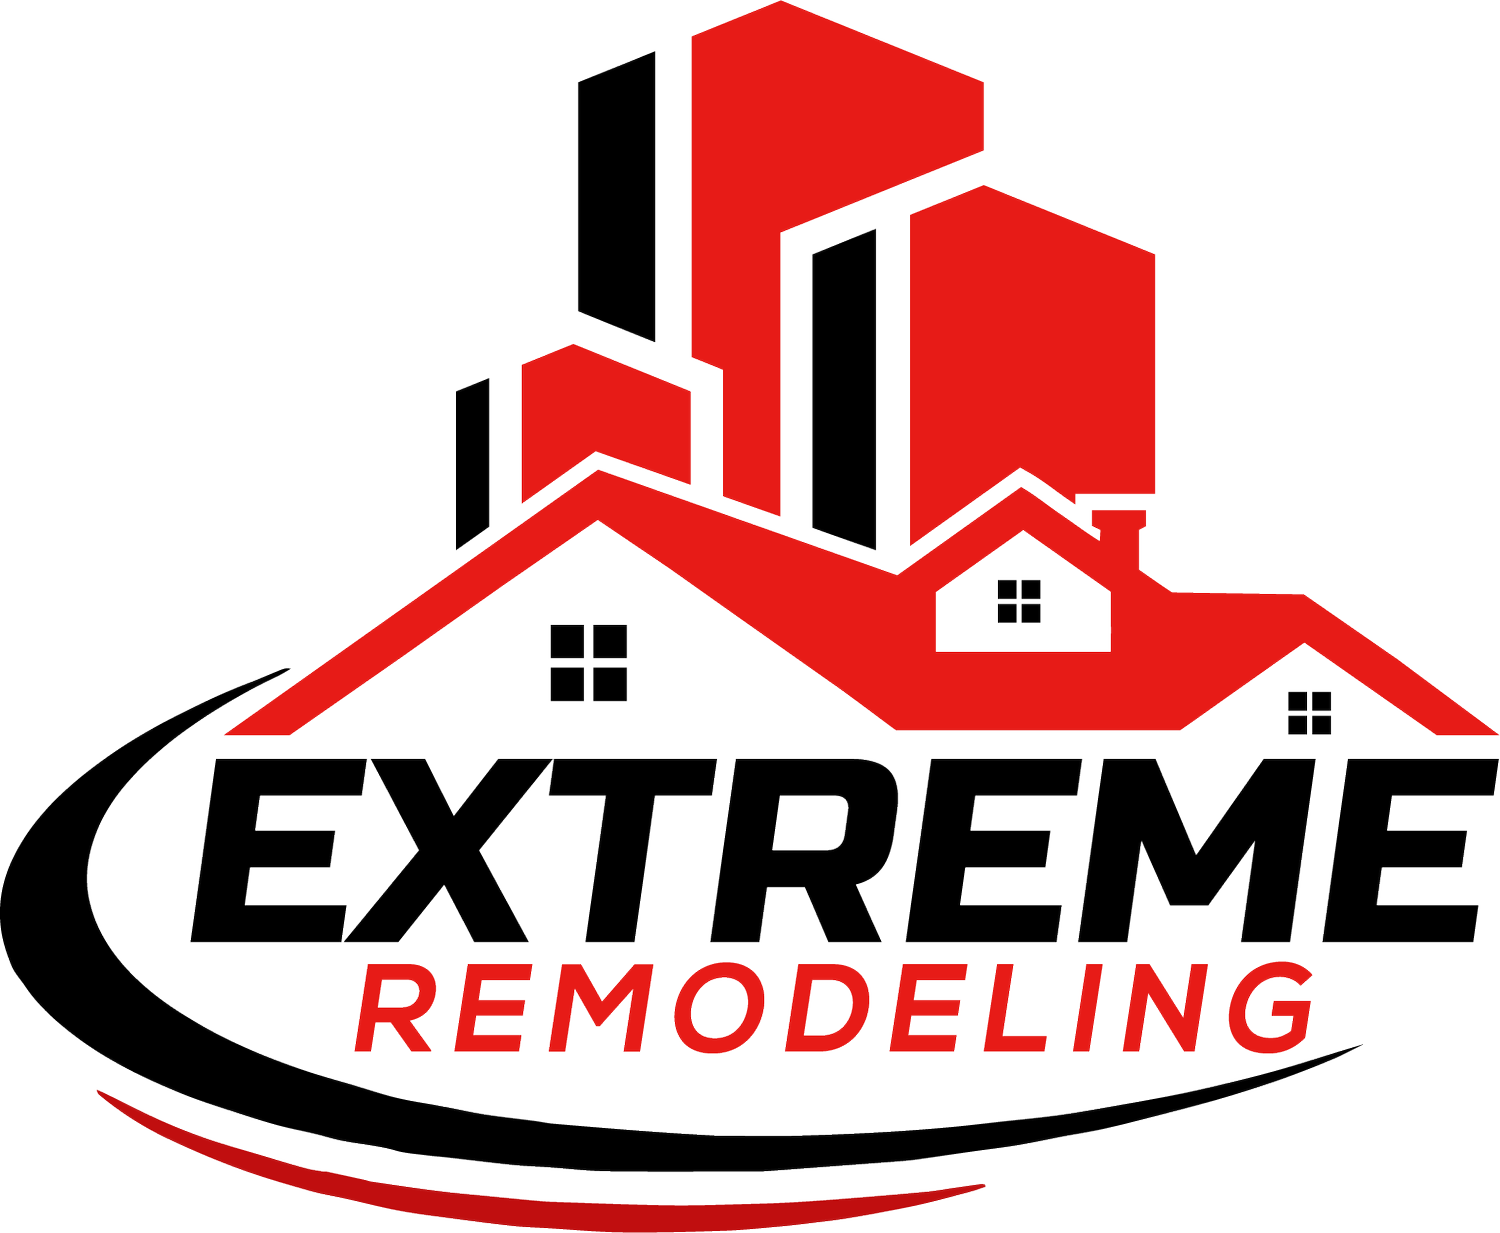 Texas Extreme Remodeling